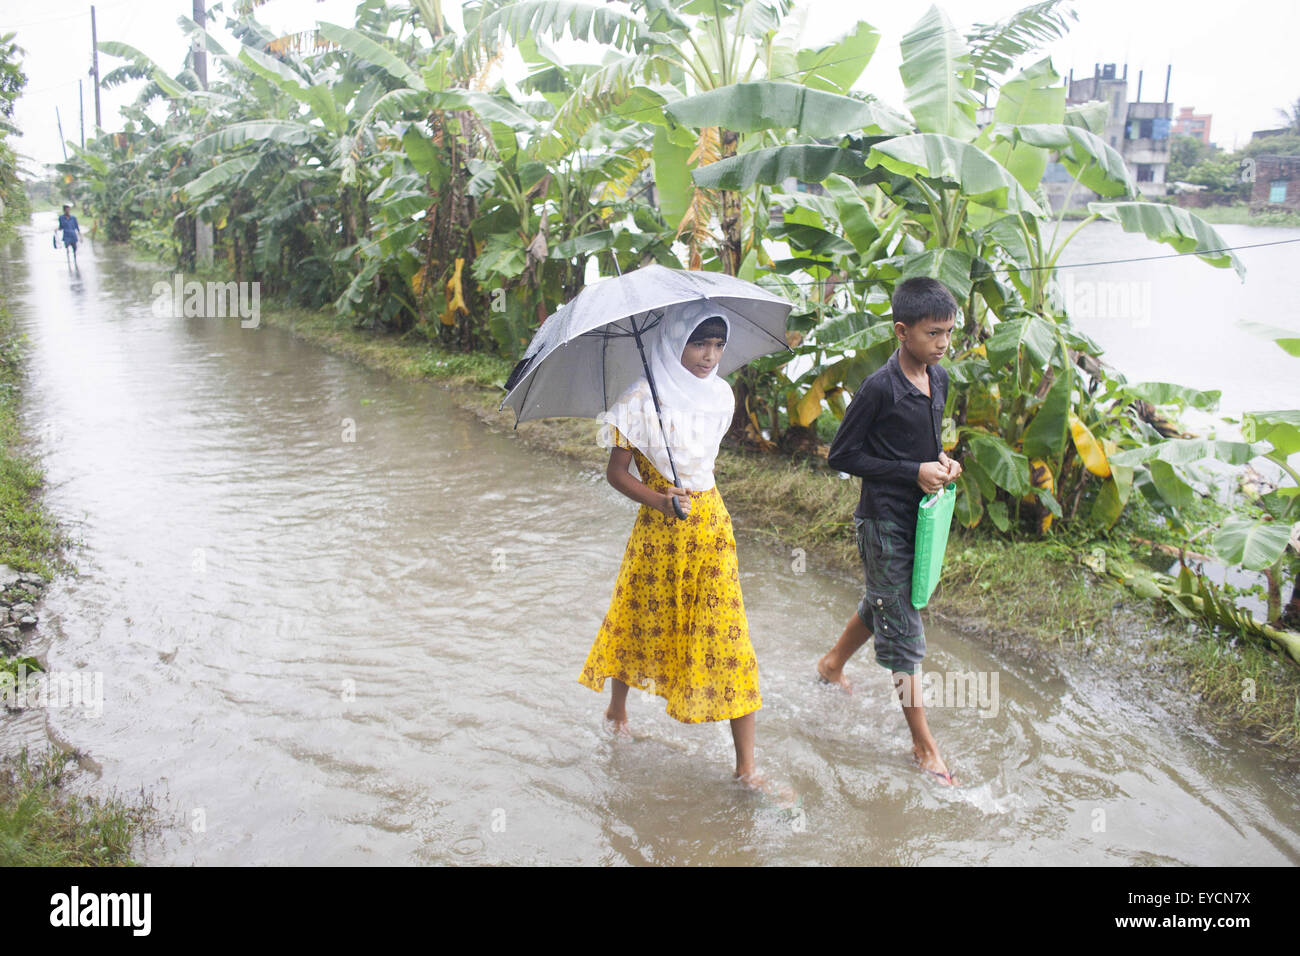 Near Dhaka, Bangladesh. 27th July, 2015. Two Bangladeshi child walks in the flood water in Vhuighar, near Dhaka, Bangladesh. Indiscriminate fish farming and encroachment of canals are contributing to the continual water logging in the area. More than 2 million residents of the DND dam have to live with the risk as the authority's concerned fail to take long-term measures to improve the situation. © Suvra Kanti Das/ZUMA Wire/Alamy Live News Stock Photo